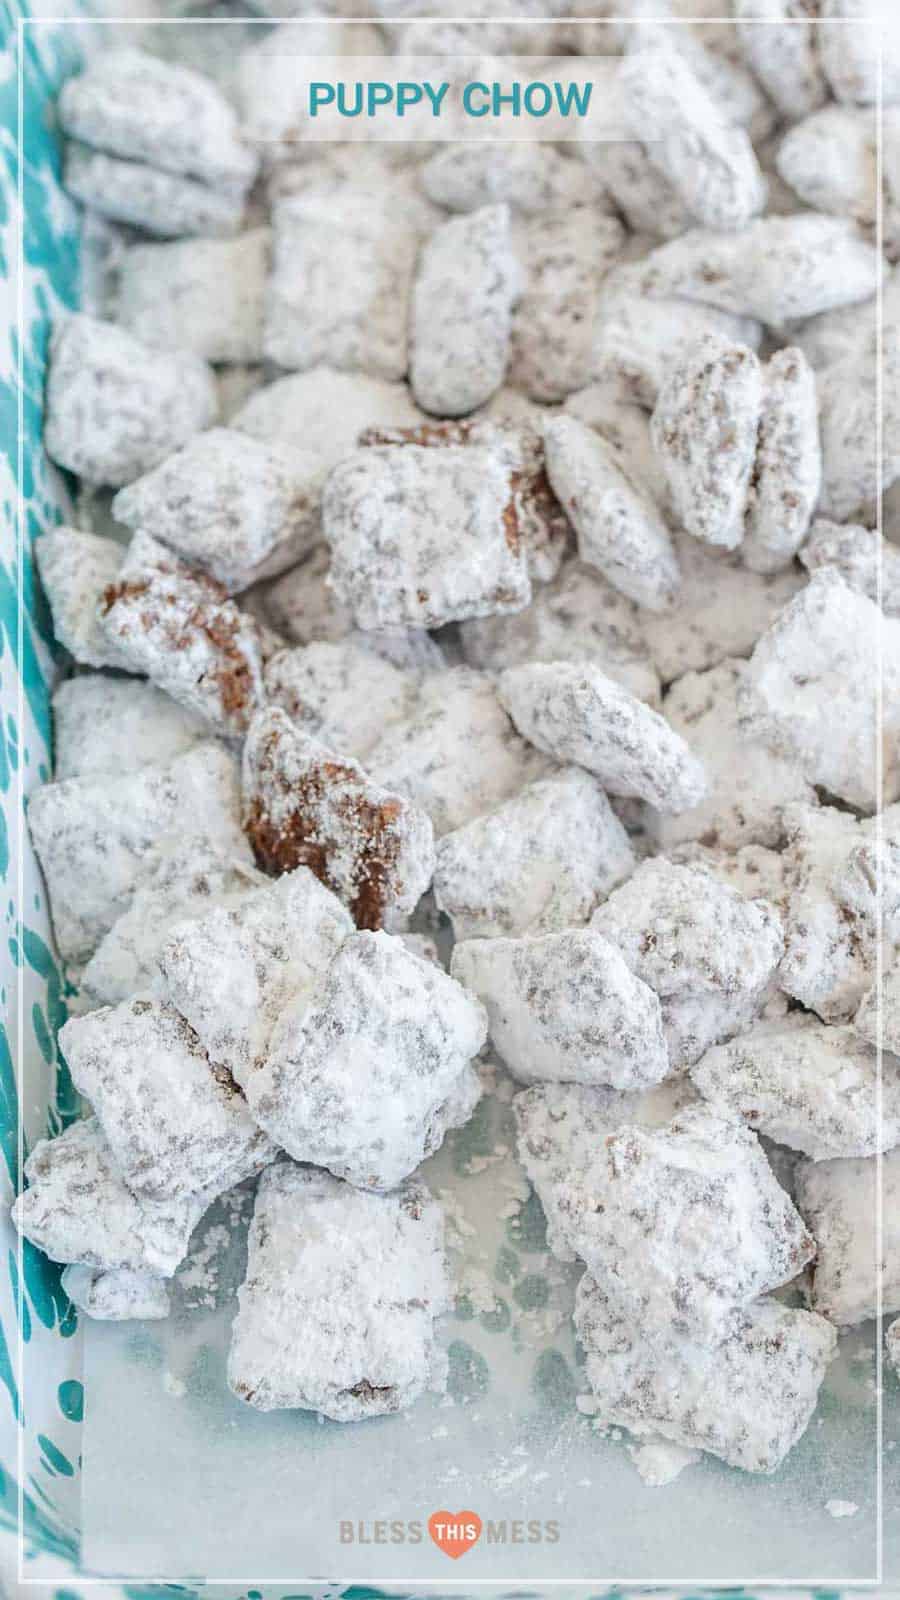 Puppy chow with peanut butter, chocolate, Chex, and powdered sugar is one of the most fun sweet treats ever, and it comes together quickly for a crunchy dessert, easy goody bag, or delicious after-school snack! This homemade puppy chow recipe is one of the simplest and most fun treats to make. I love getting the kids involved because it's so straightforward and a great way to get them interested in cooking and baking! #puppychowrecipe #puppychow #muddybuddies #chexcereal #simpledesserts